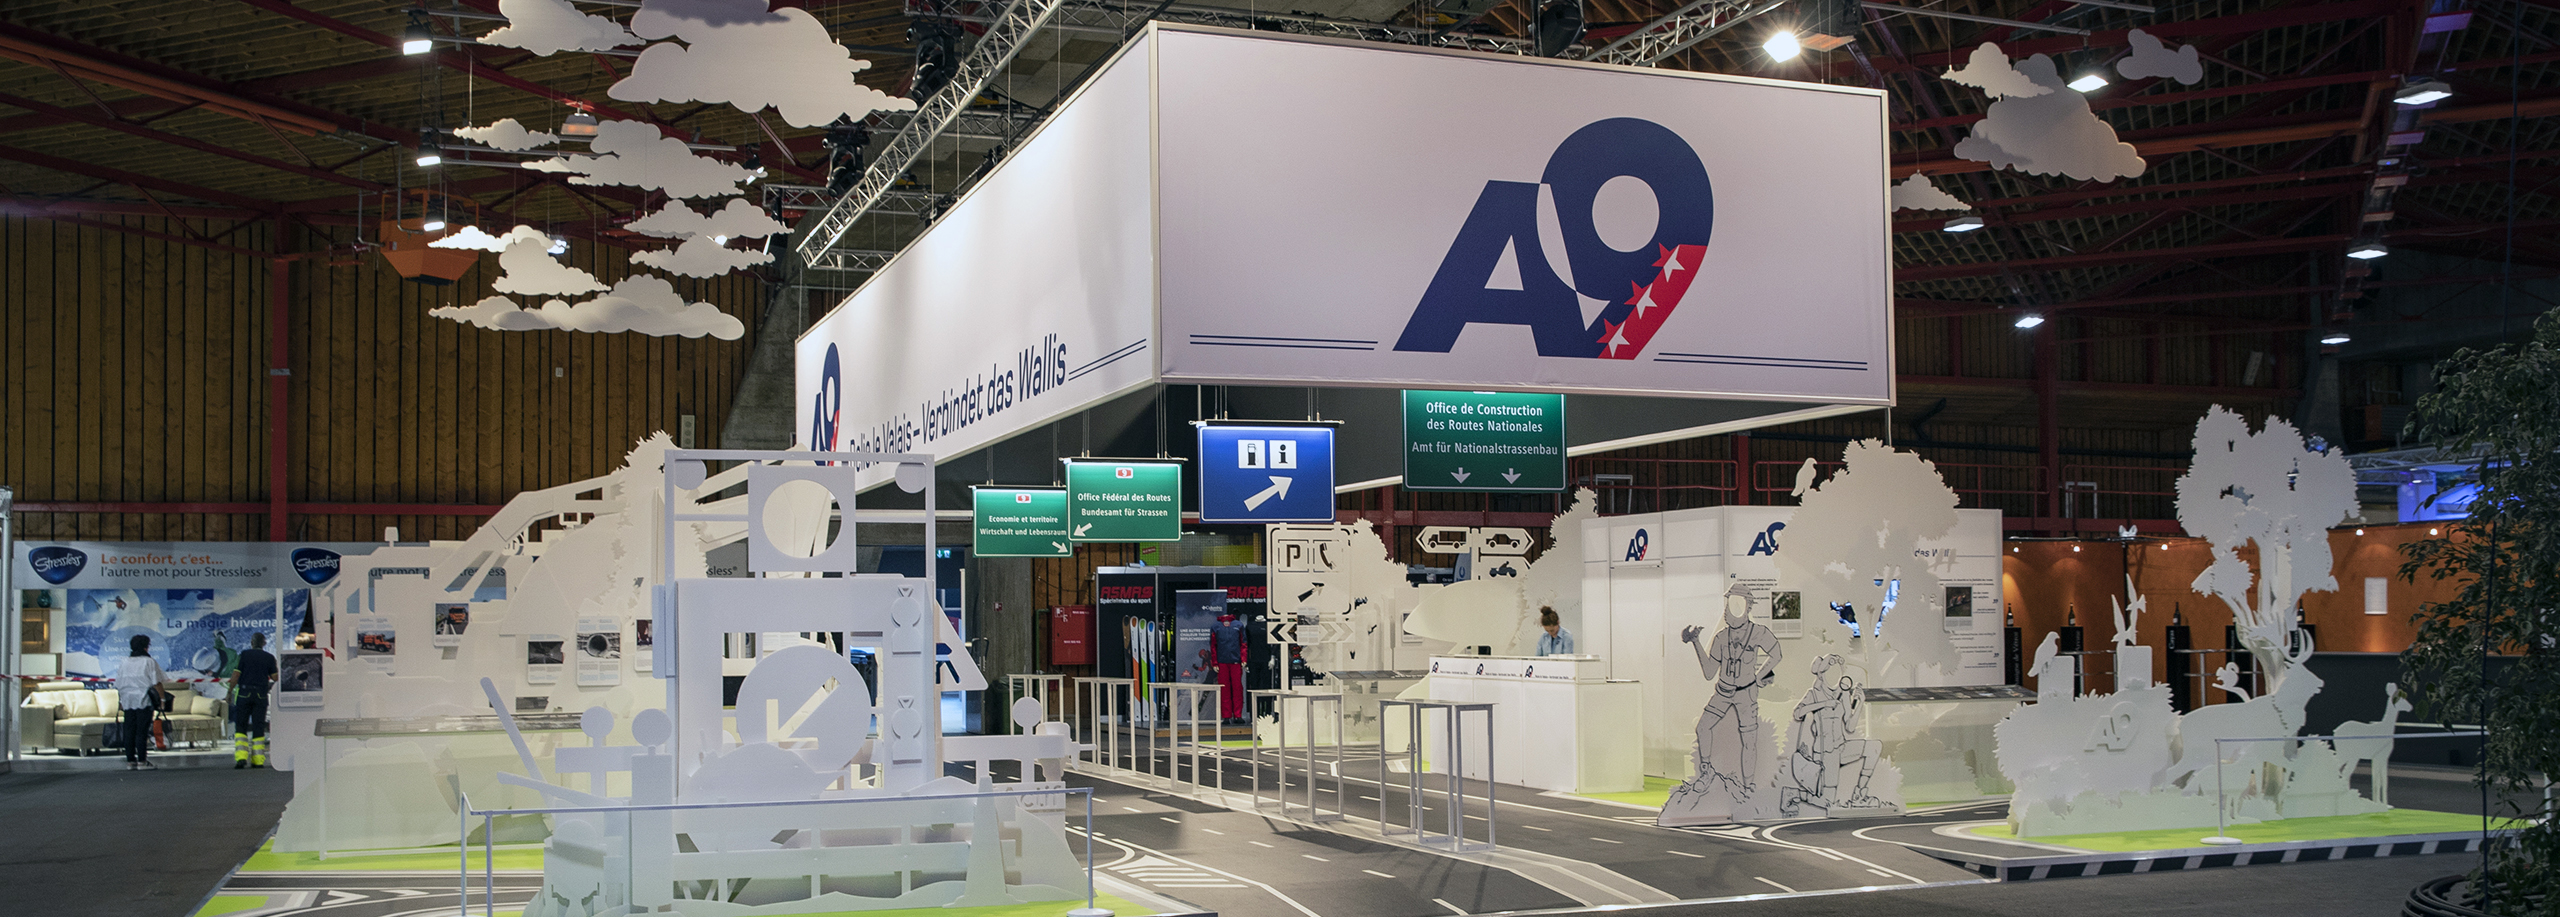 A9 Stand